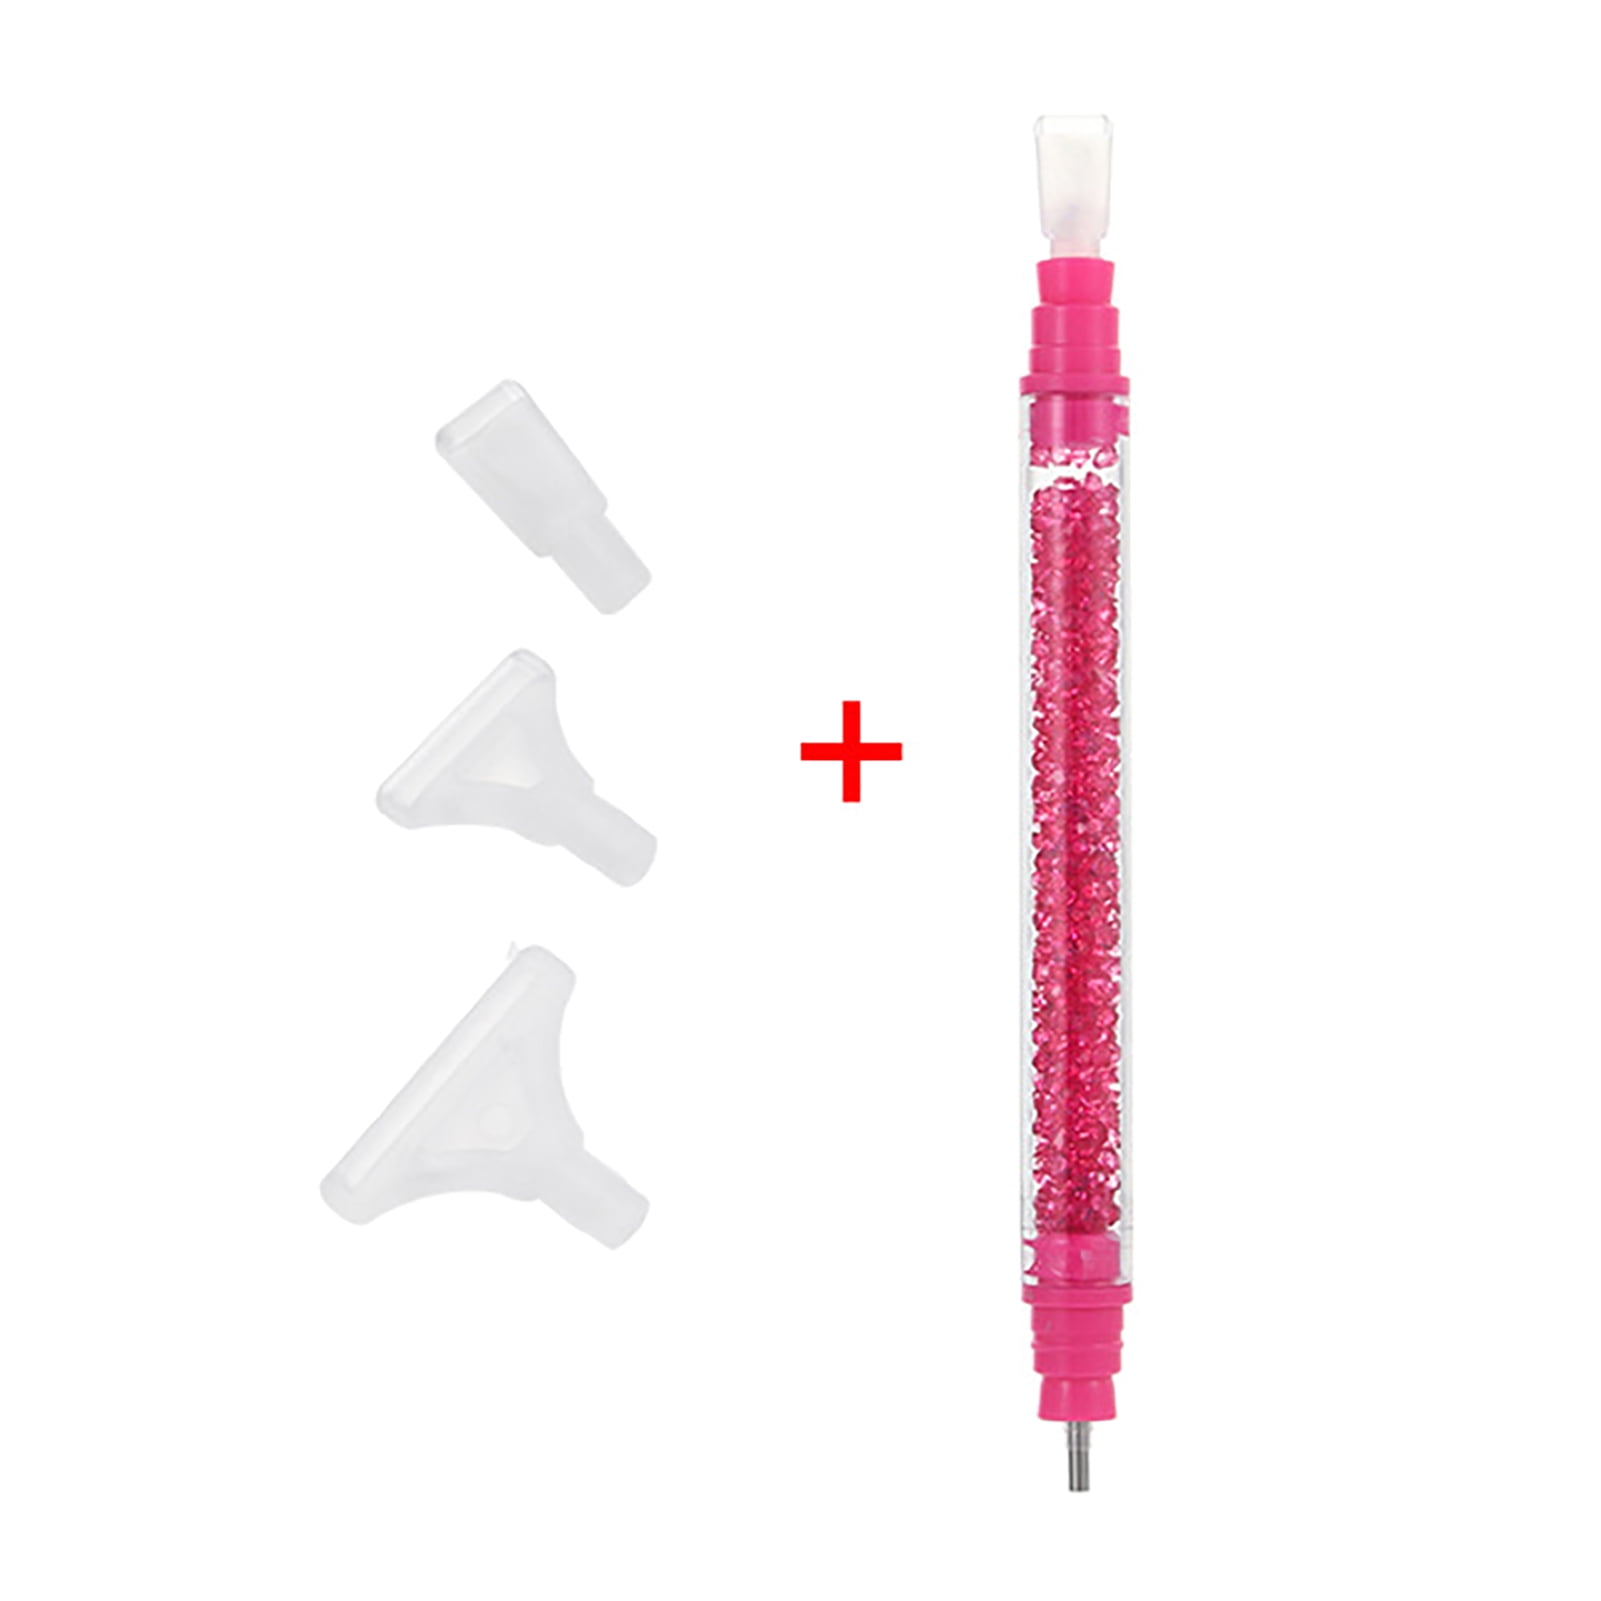 Crystal Diamond Painting Tool Point Drill Pen Embroidery Cross Stitch DIY Kits 